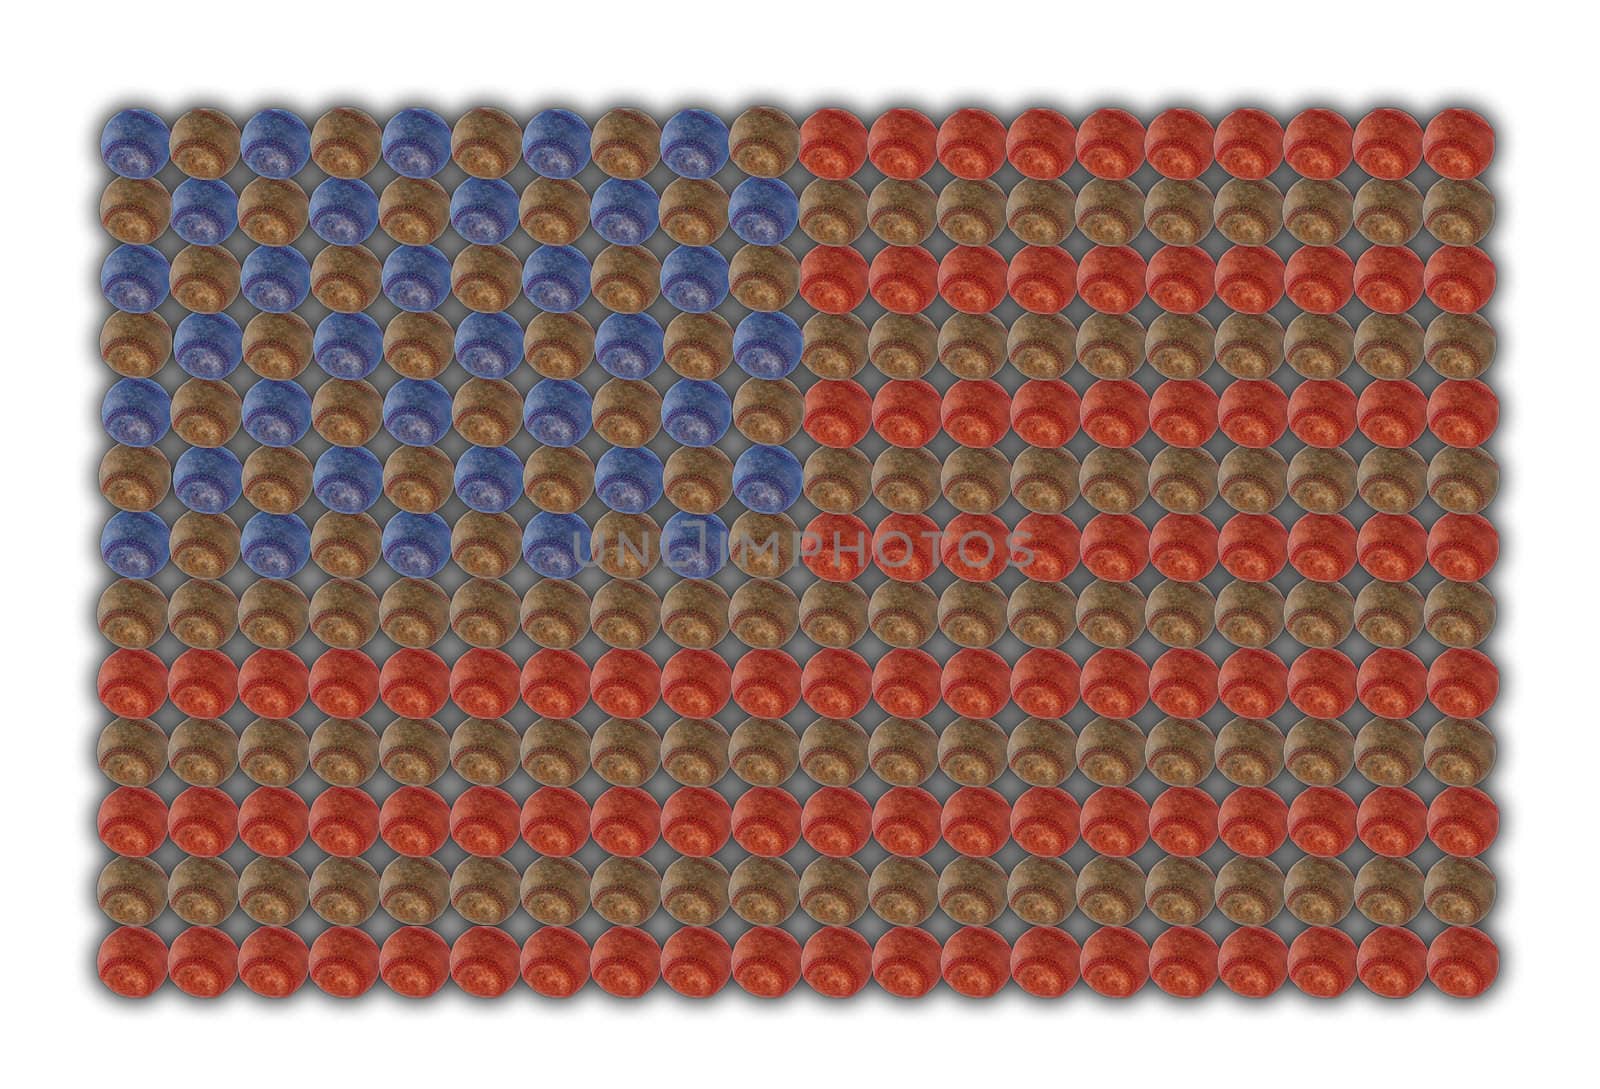 American flag made out of baseballs isolated on white background